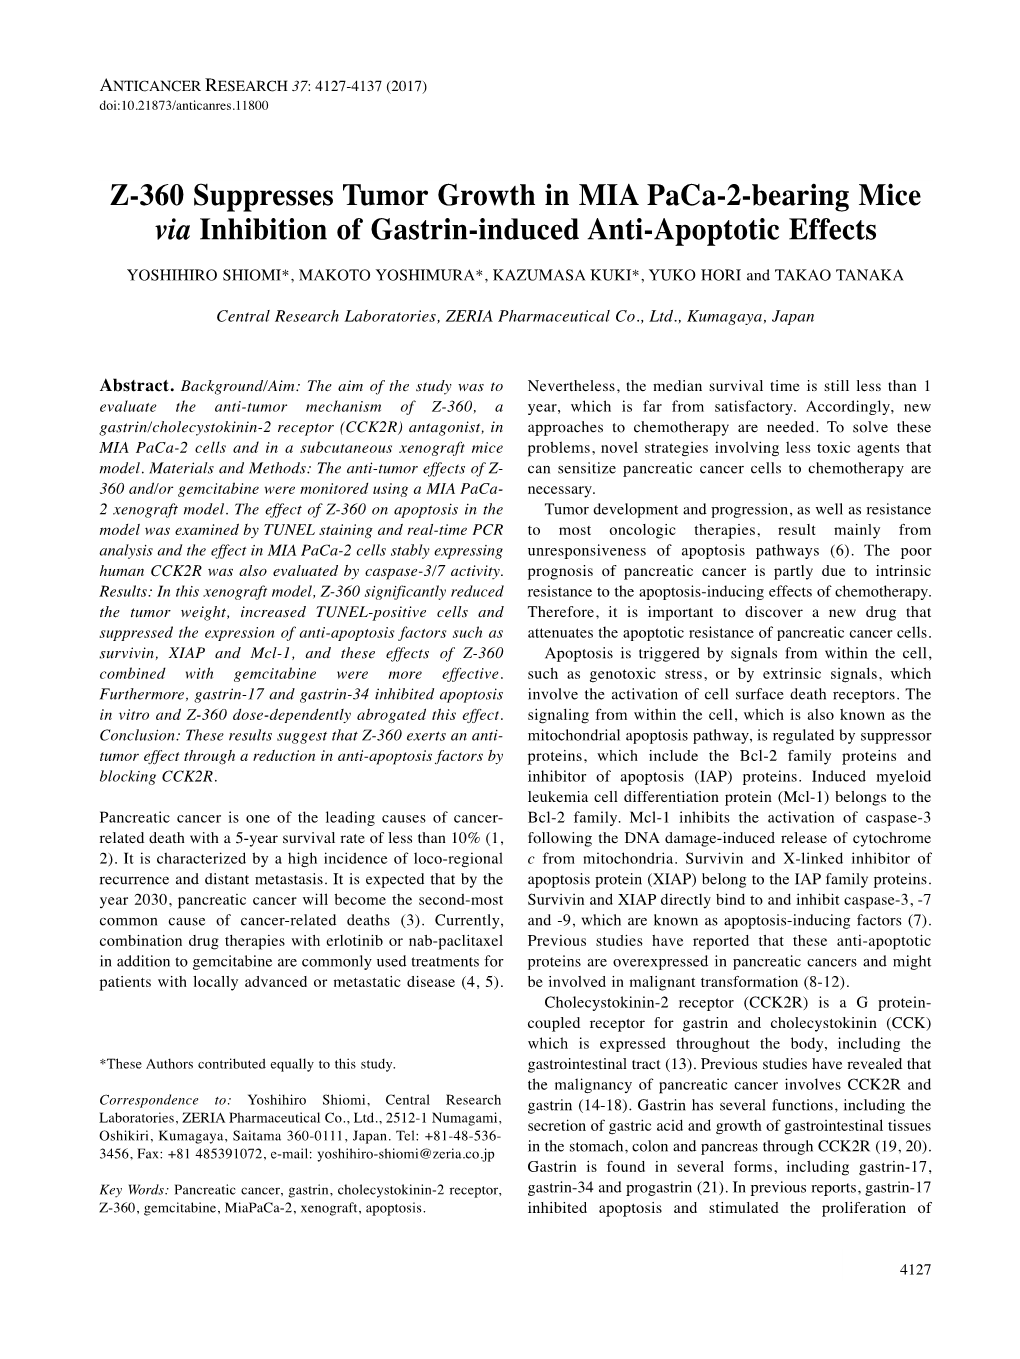 Z-360 Suppresses Tumor Growth in MIA Paca-2-Bearing Mice Via Inhibition of Gastrin-Induced Anti-Apoptotic Effects